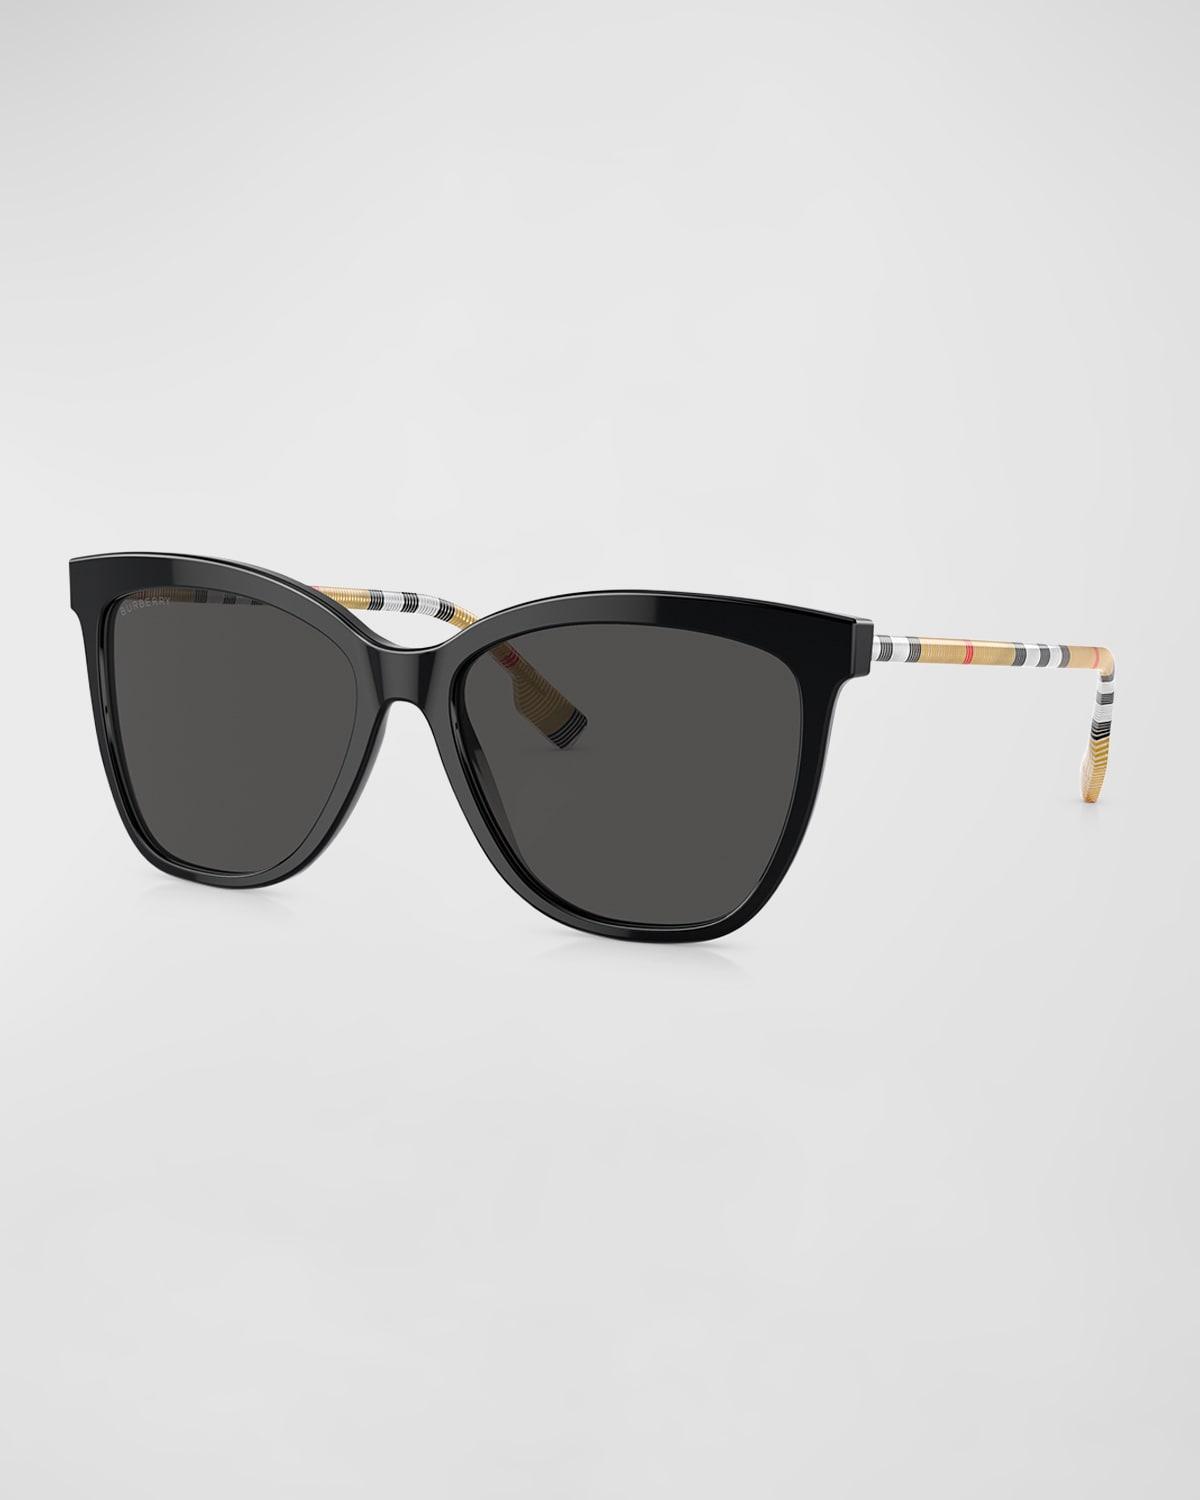 Burberry Clare Grey Butterfly Ladies Sunglasses BE4308 385387 56 Product Image